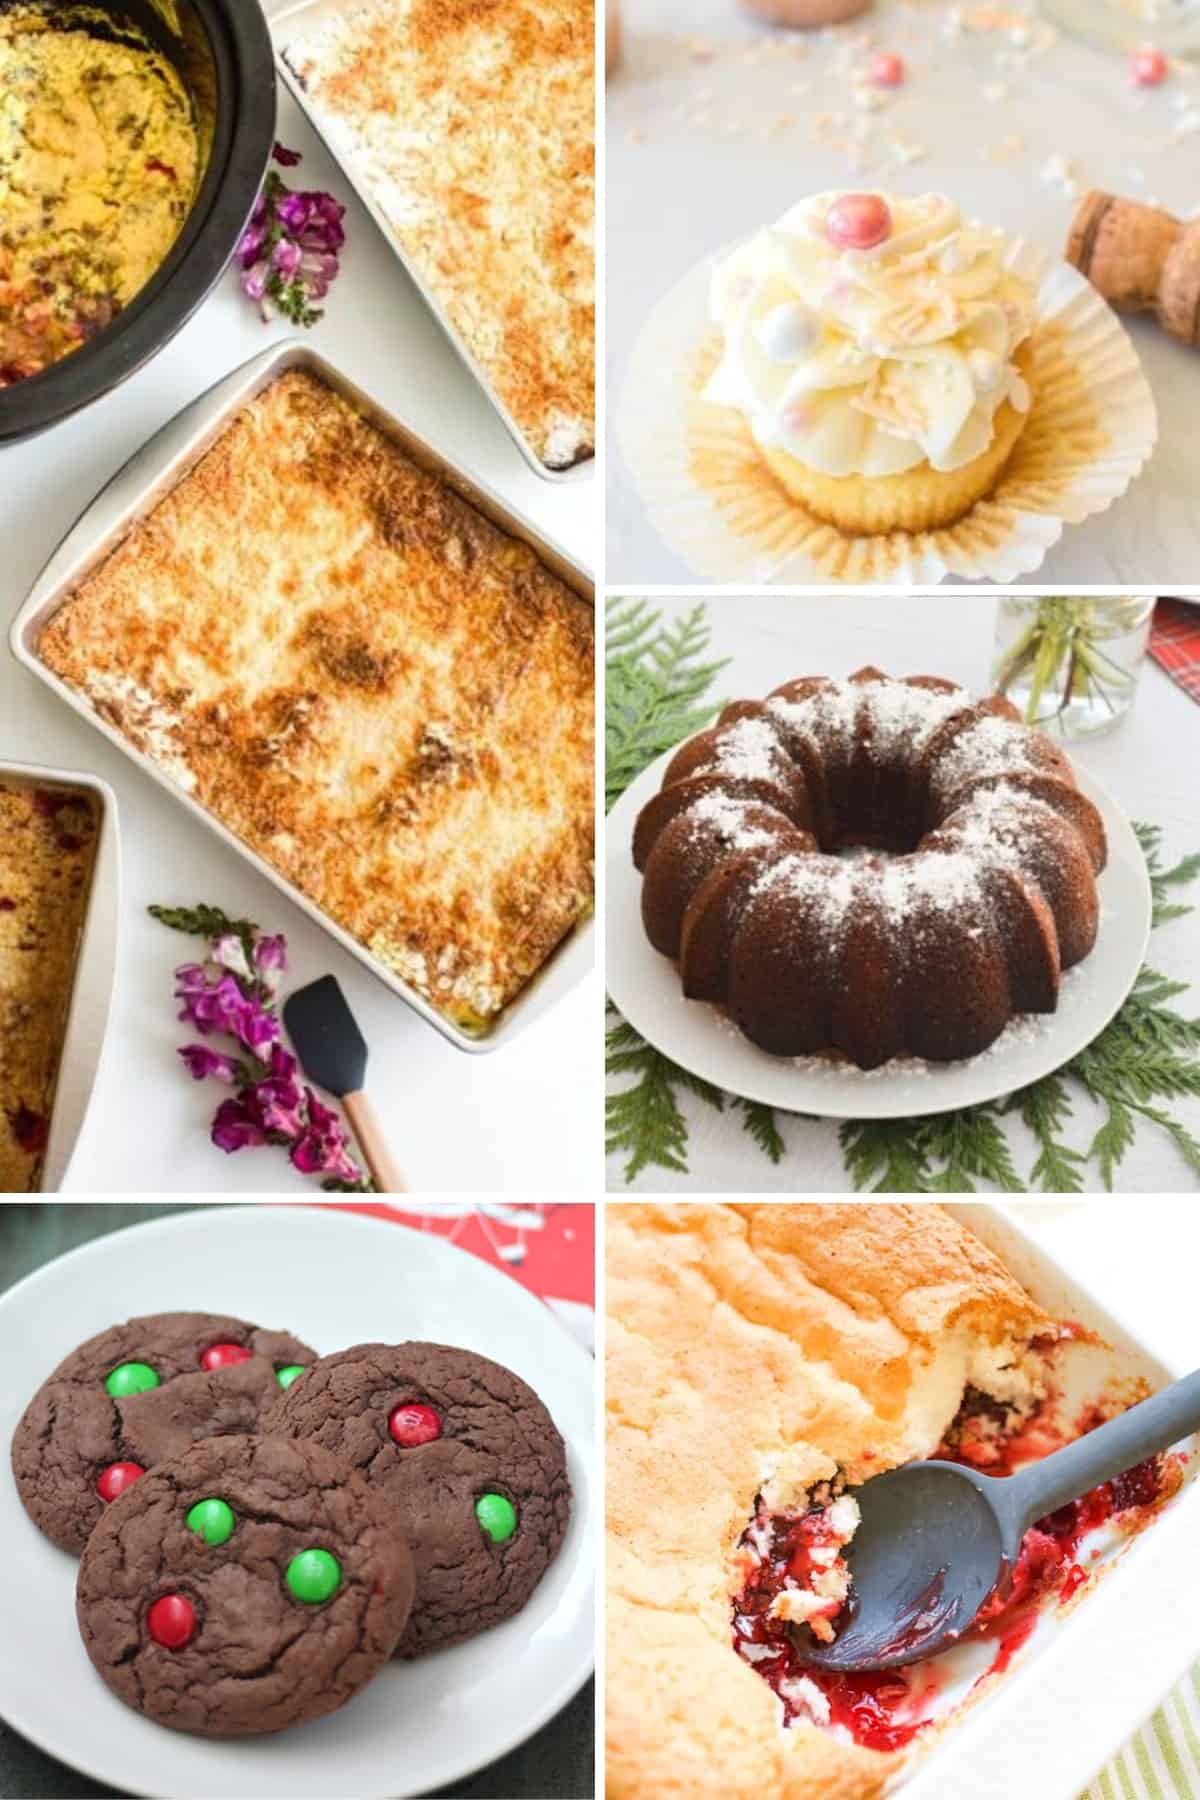 A collage of images of desserts that can be made with cake mix.